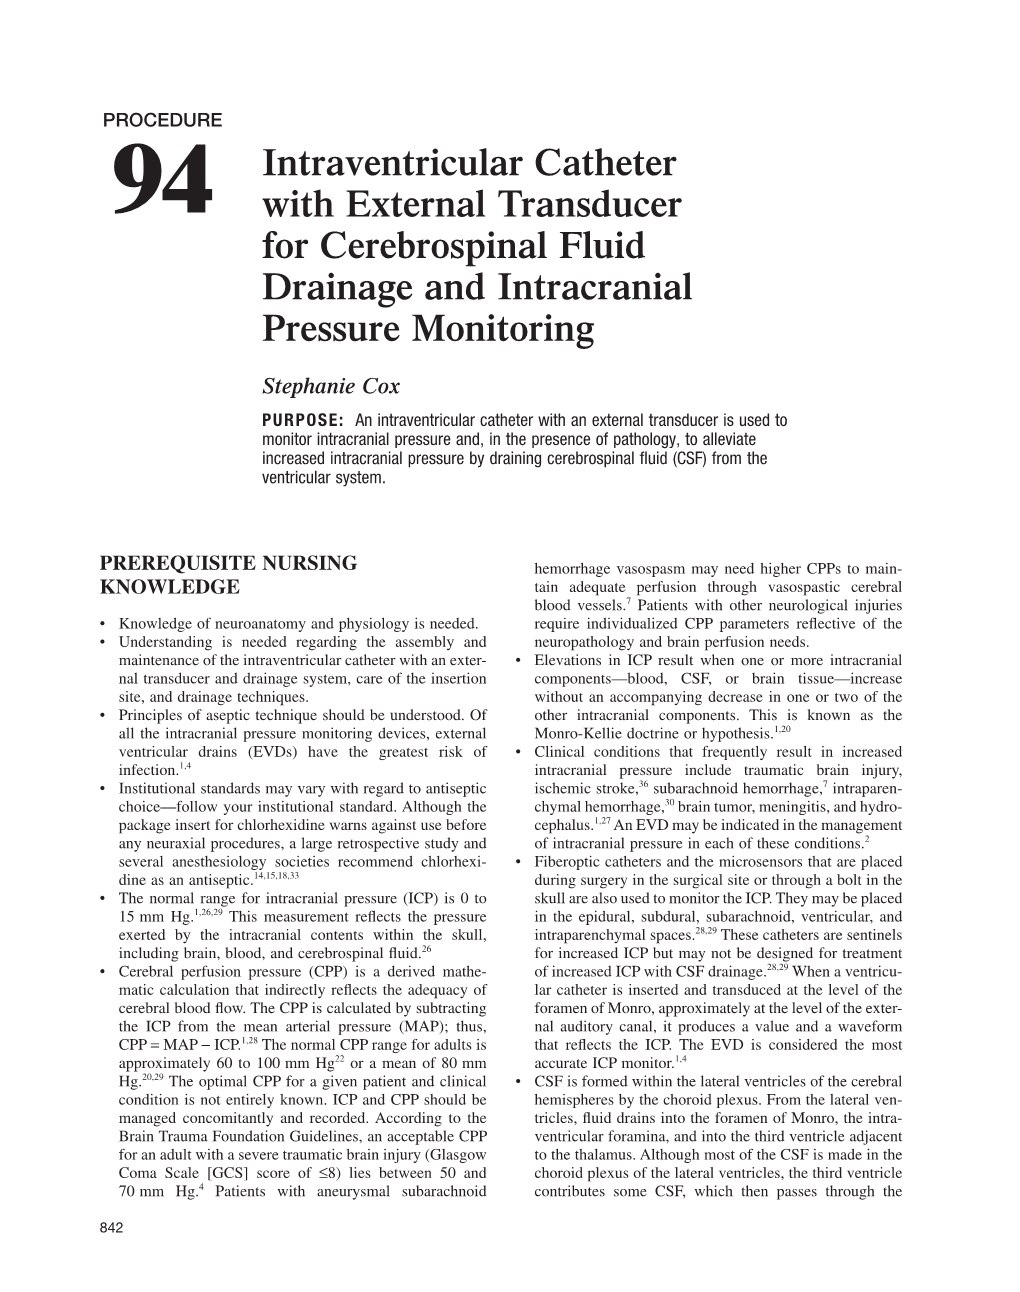 94 Intraventricular Catheter with External Transducer for CSF Drainage and ICP Monitoring 843